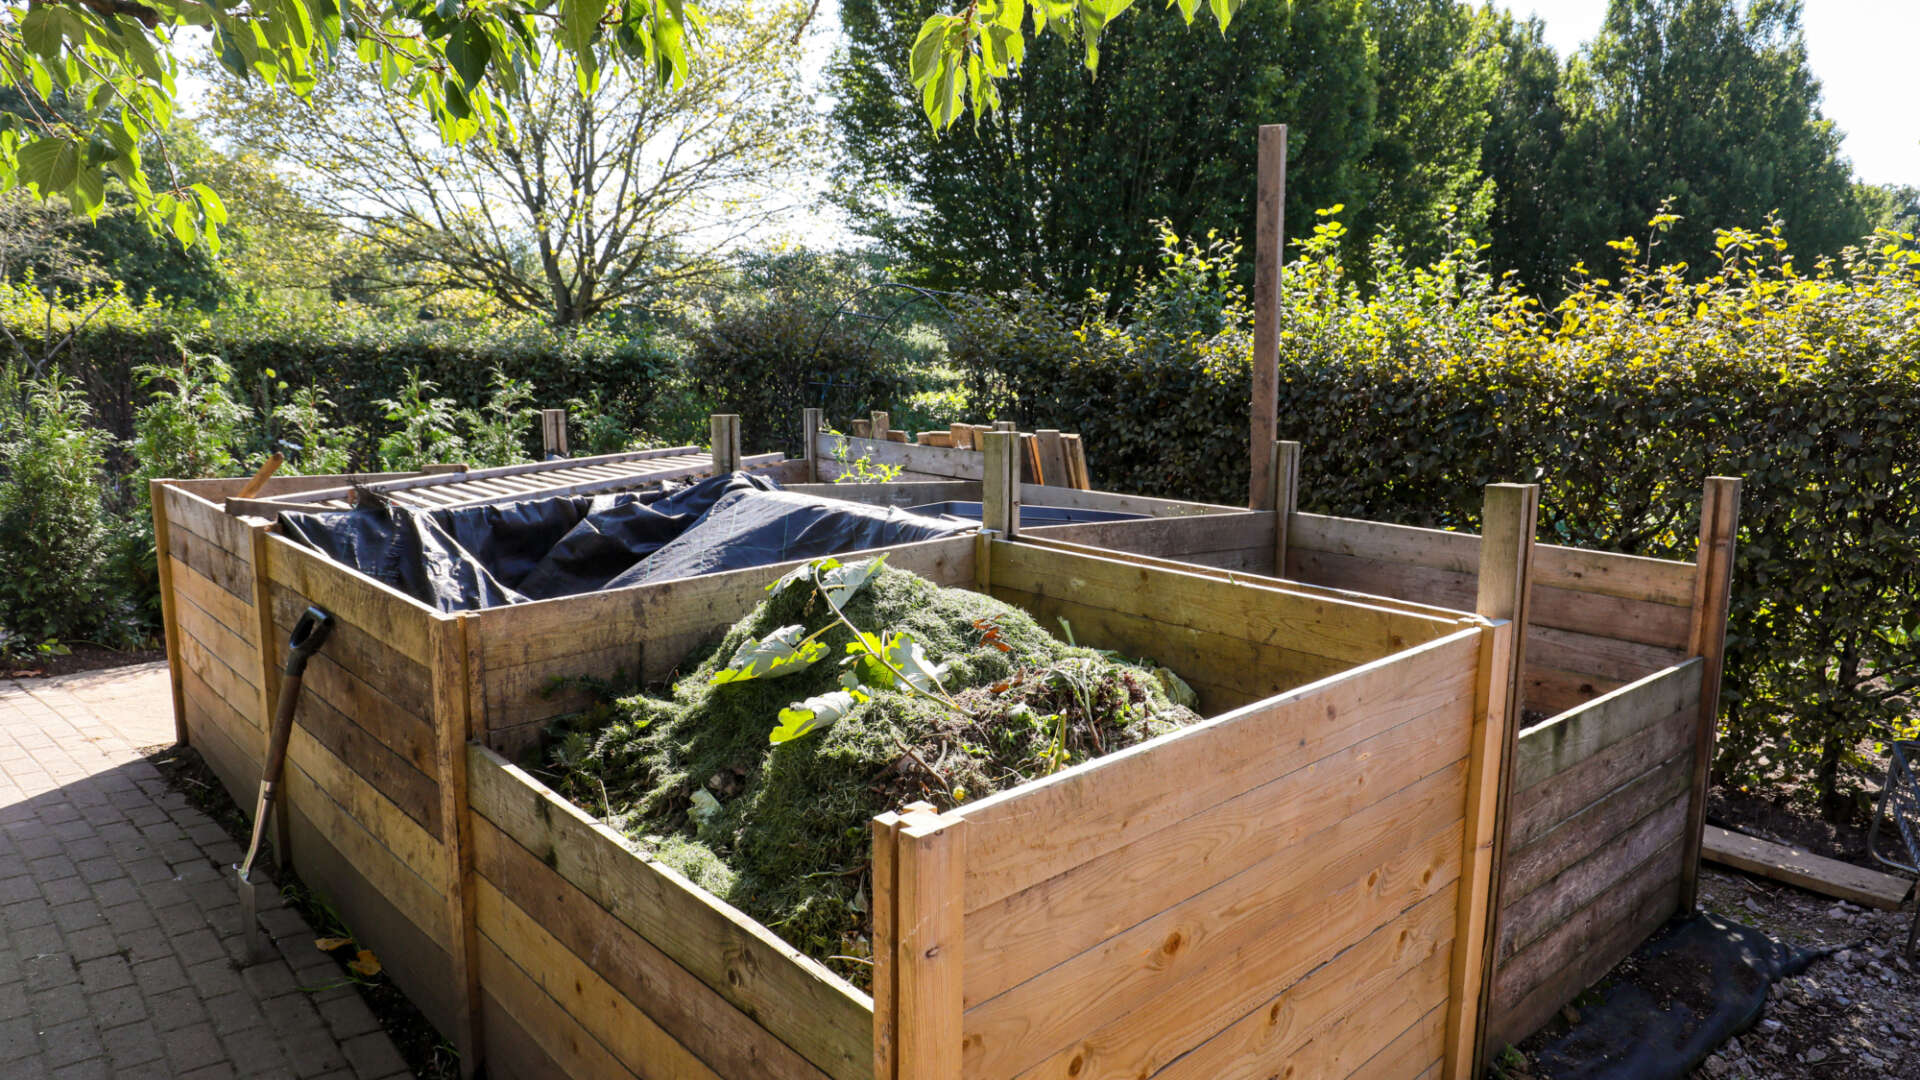 How To Compost For Garden